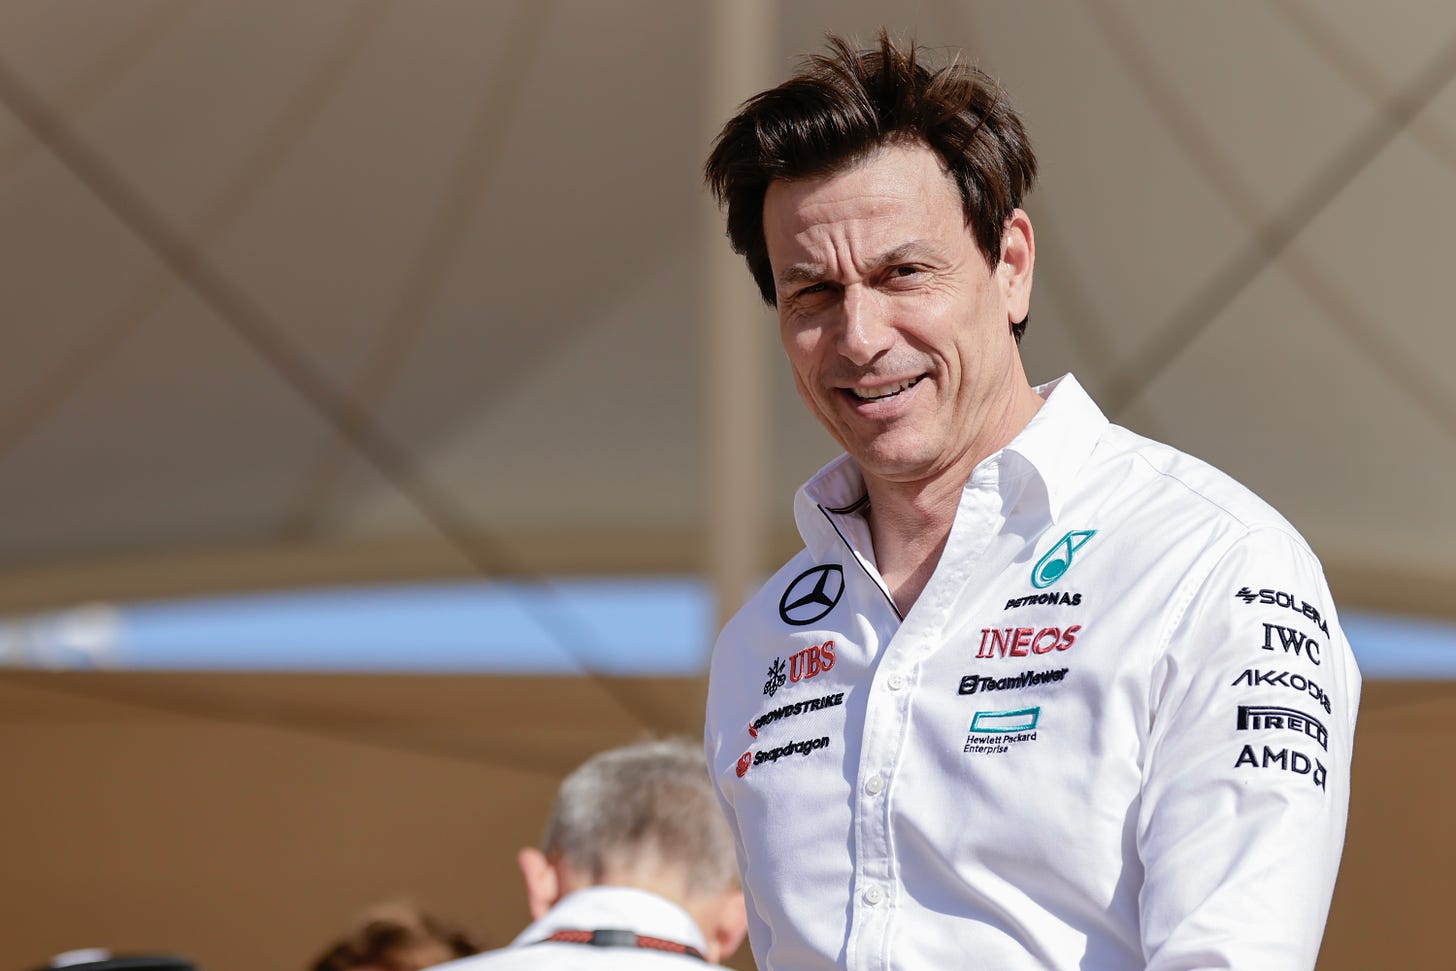 Cheeky Toto Wolff offers Marko Helmut a job amid fears he could be forced  out of Red Bull after Christian Horner scandal | The Sun